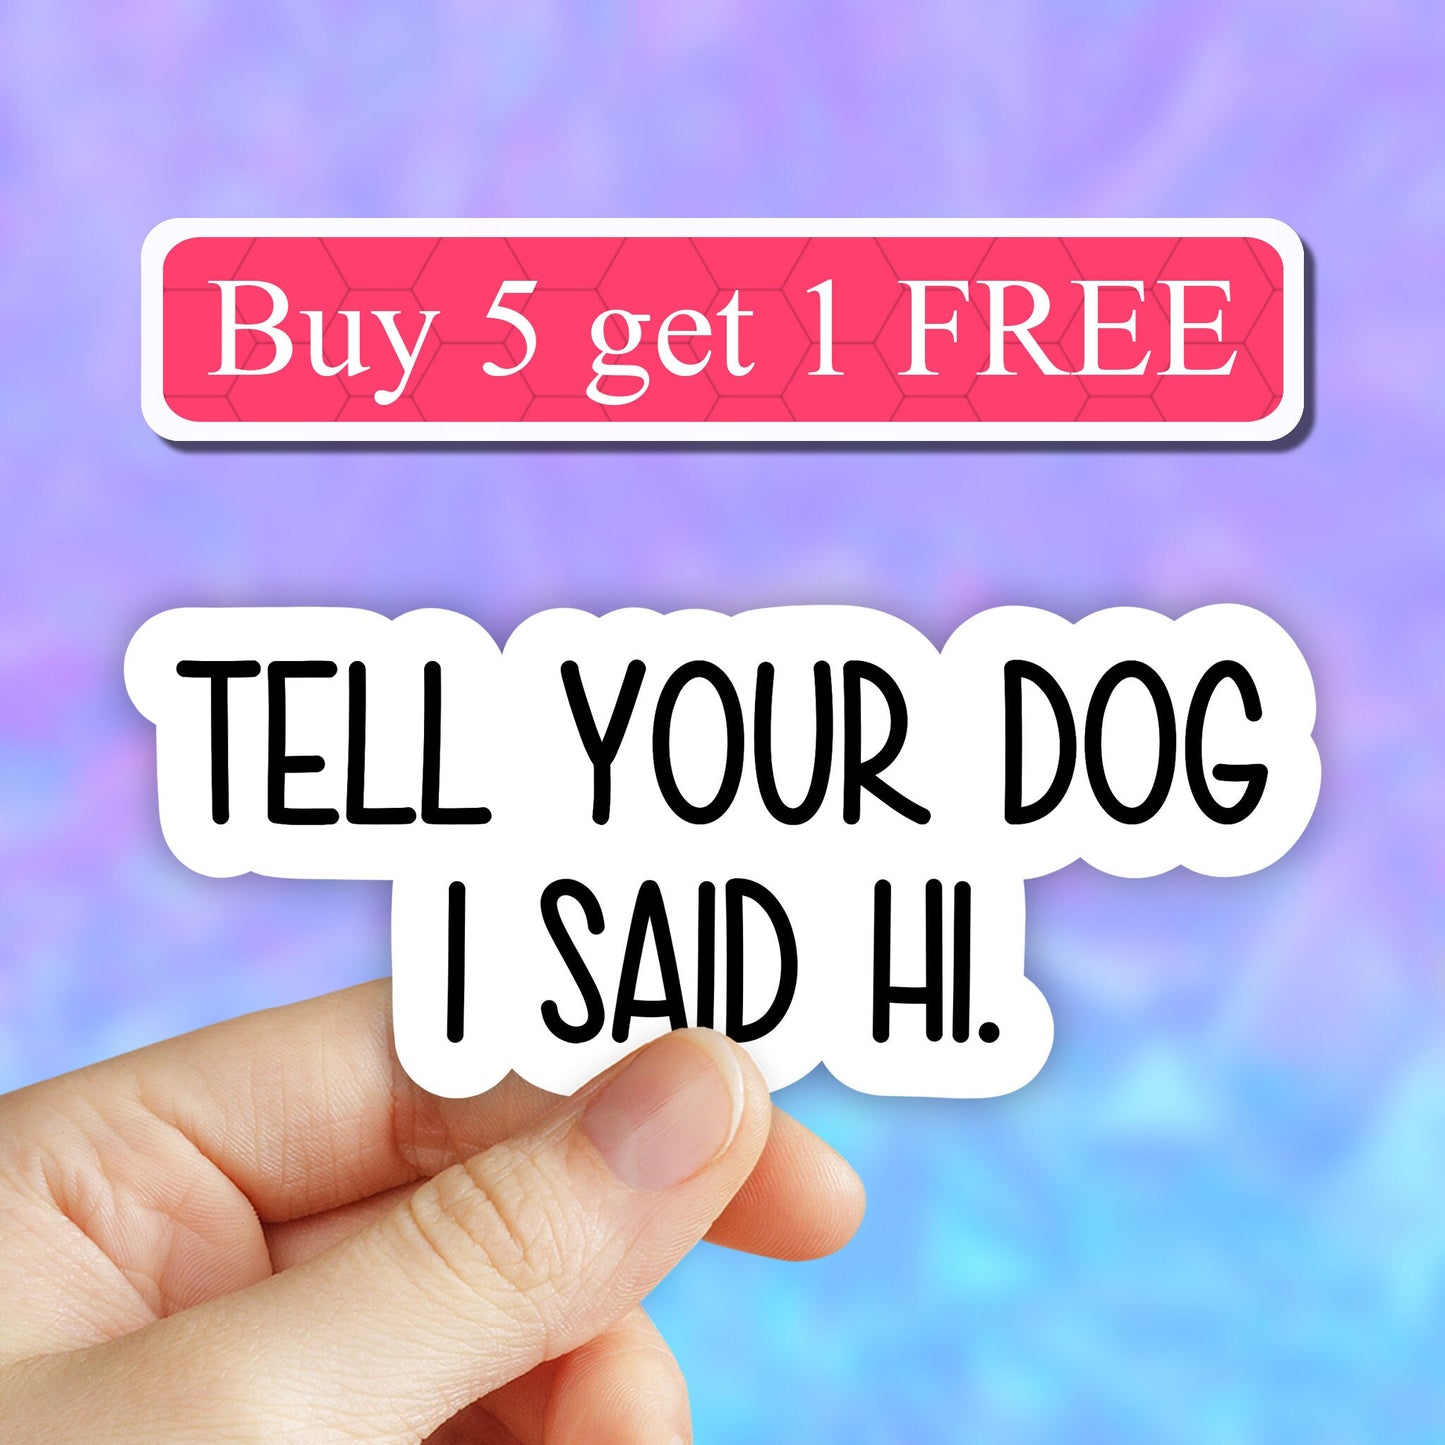 Tell your dog i said hi Sticker, Dog stickers, wait i see a dog sticker, Dog Mom Laptop Decals, dog lover decal, pet stickers, waterbottle